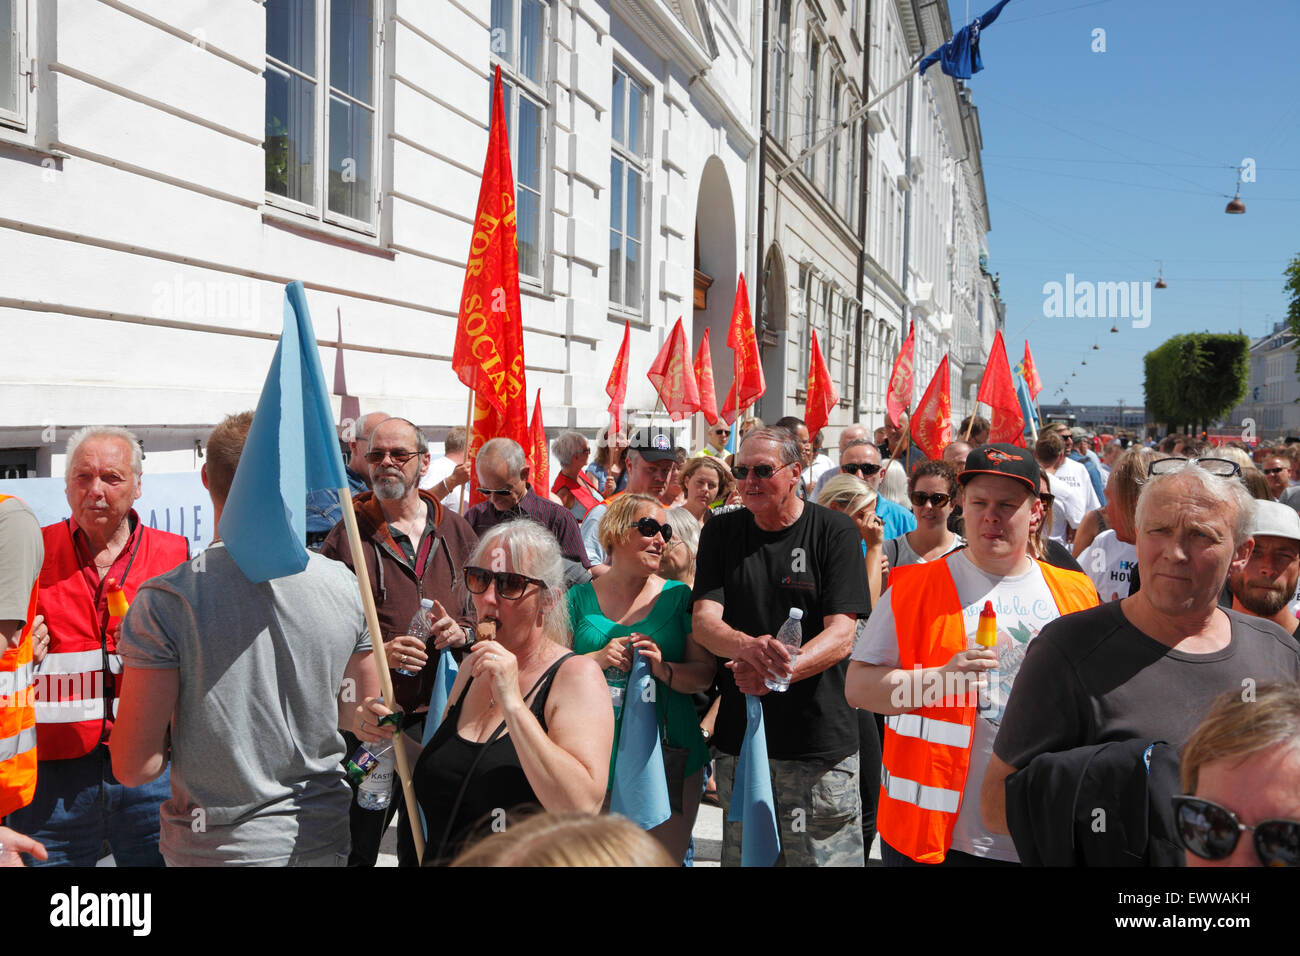 Copenhagen, Denmark. July 1, 2015. The Danish labour market model and the Danish Federation of Trade Unions (LO) won this afternoon in the Danish Labour Court in Copenhagen. Ryanair’s recently established base in Copenhagen is ruled subject to Danish labour laws and industrial actions can be taken by the unions. A large supporting crowd of supporters, members from other unions, etc. waiting outside the court building to hear the court ruling. The red flags and banners belong to the social education workers union. Credit:  Niels Quist/Alamy Live News Stock Photo